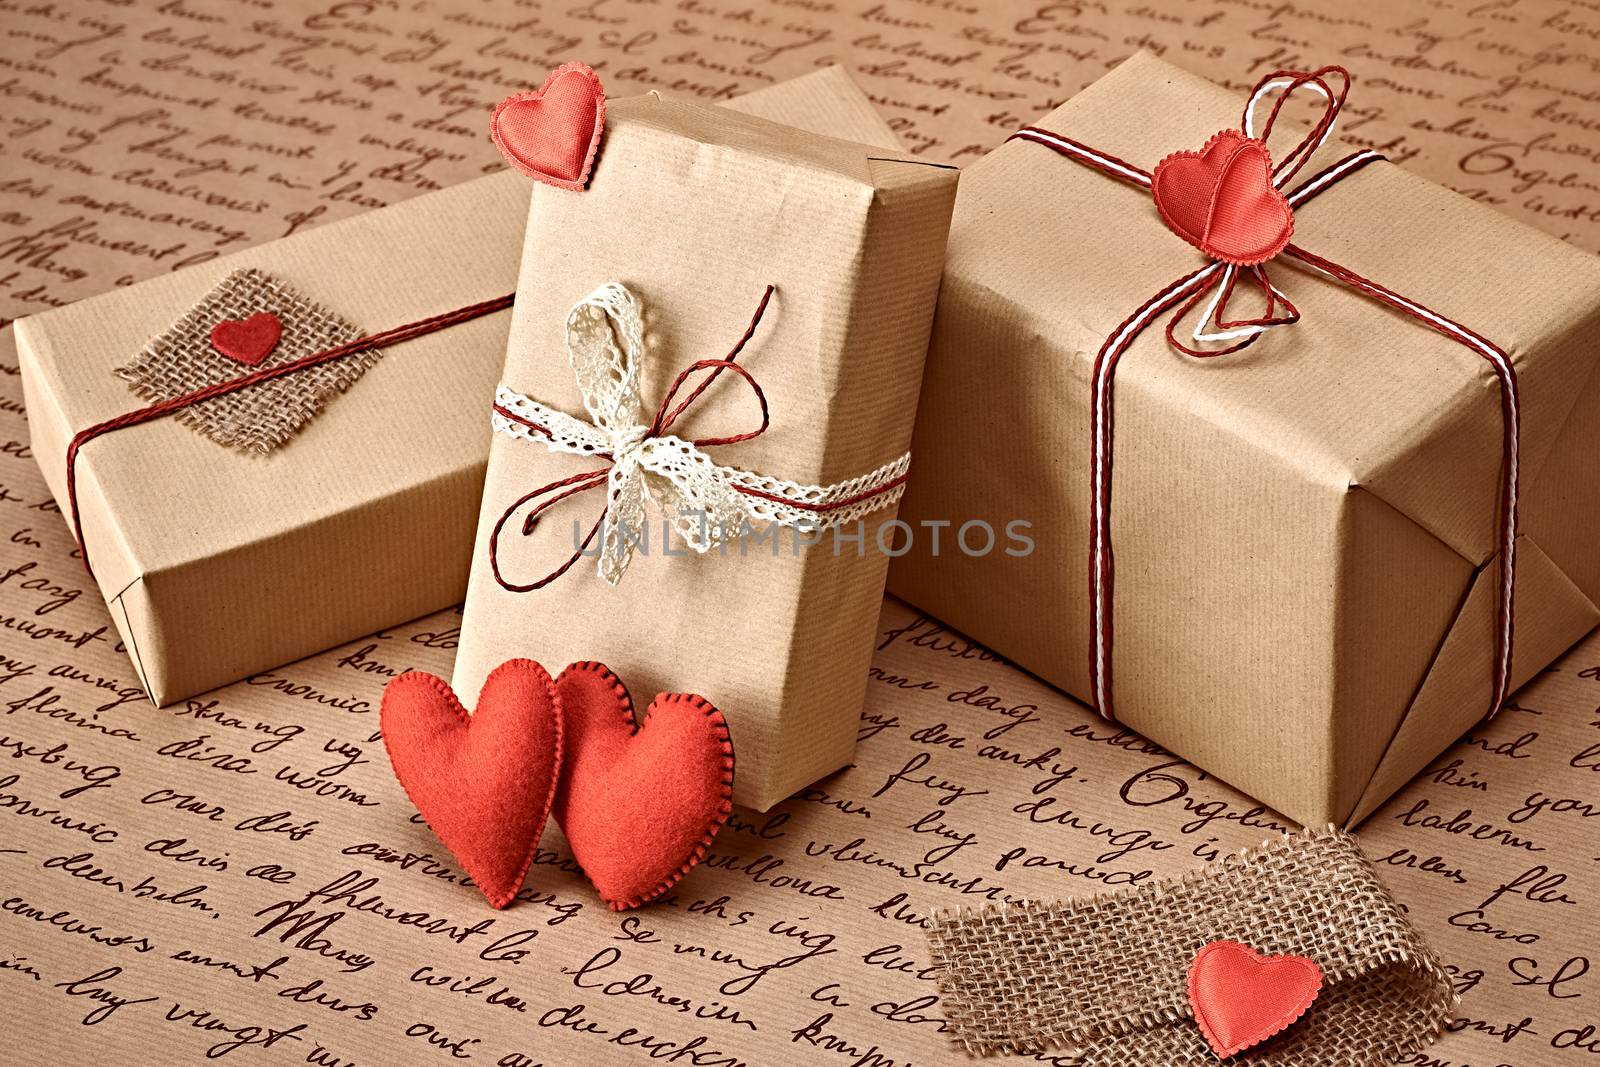 Love hearts, Valentines Day. Handcraft gift boxes, presents. Couple of red felt hearts. Retro romantic styled. Vintage retro concept, unusual greeting card. Kraft paper, copyspase